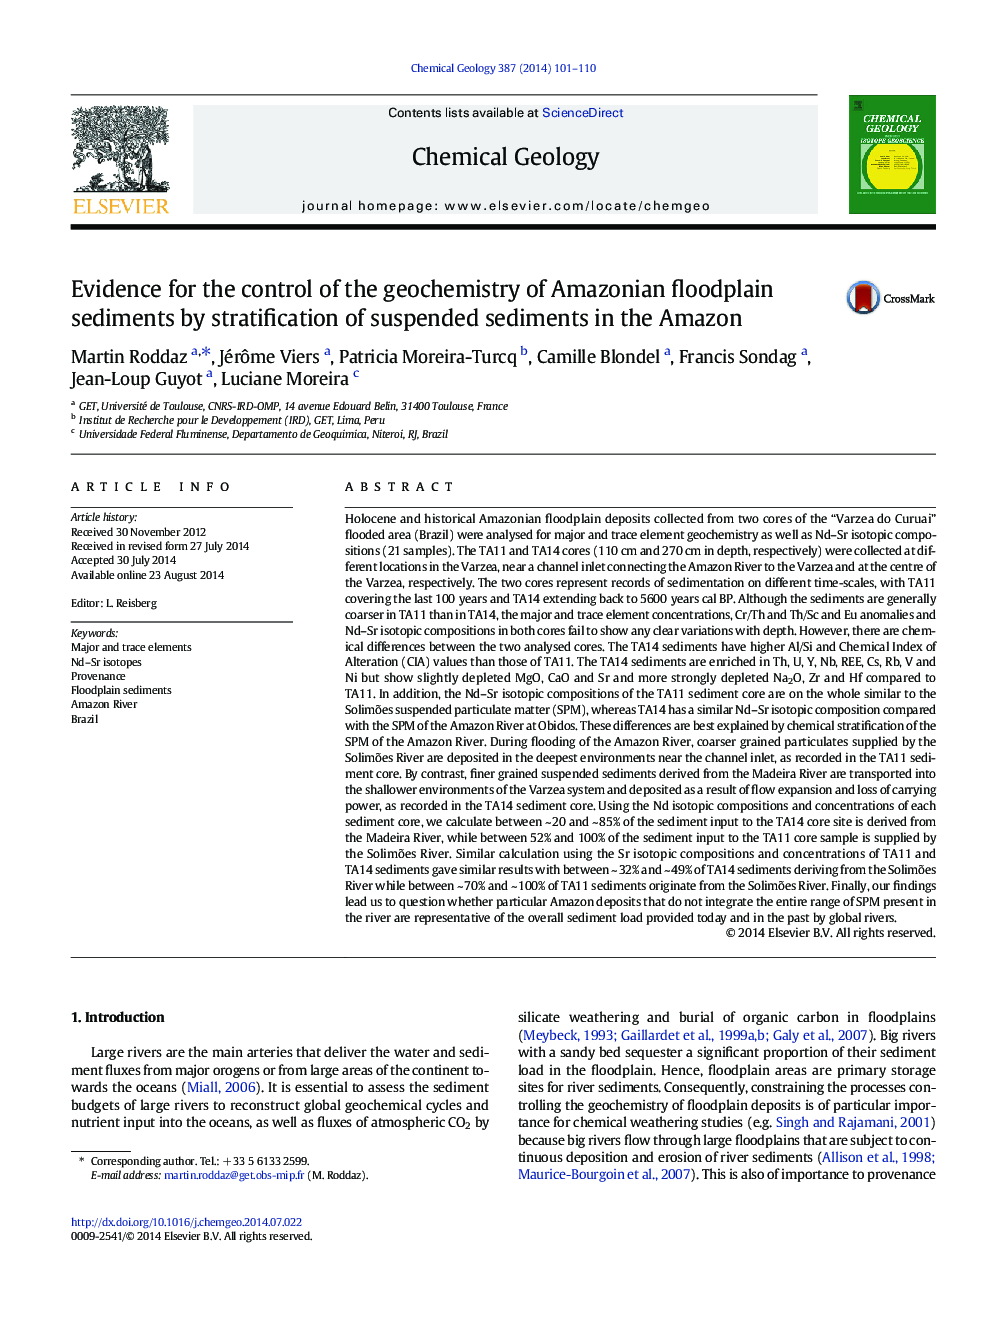 Evidence for the control of the geochemistry of Amazonian floodplain sediments by stratification of suspended sediments in the Amazon